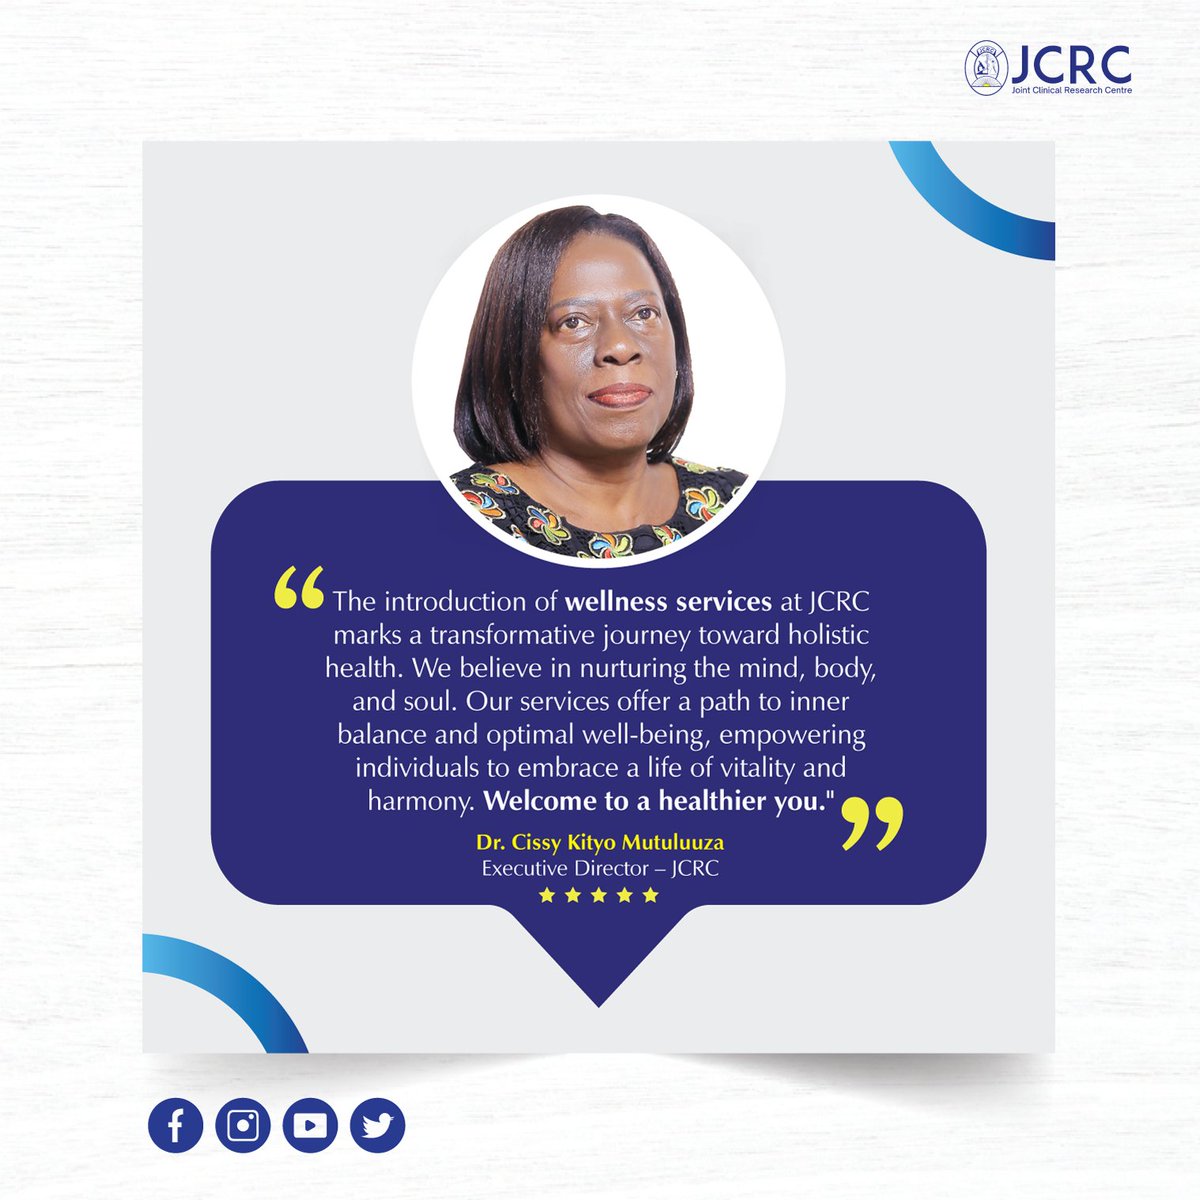 A quote from our ED, Dr. Cissy K. Mutuluuza while launching the Wellness services @jcrc_official1. Discover a world of wellness at JCRC - your haven for rejuvenation and balance. Experience top-notch services and expert care, that nurtures mind, body, and spirit. #JCRCAt30